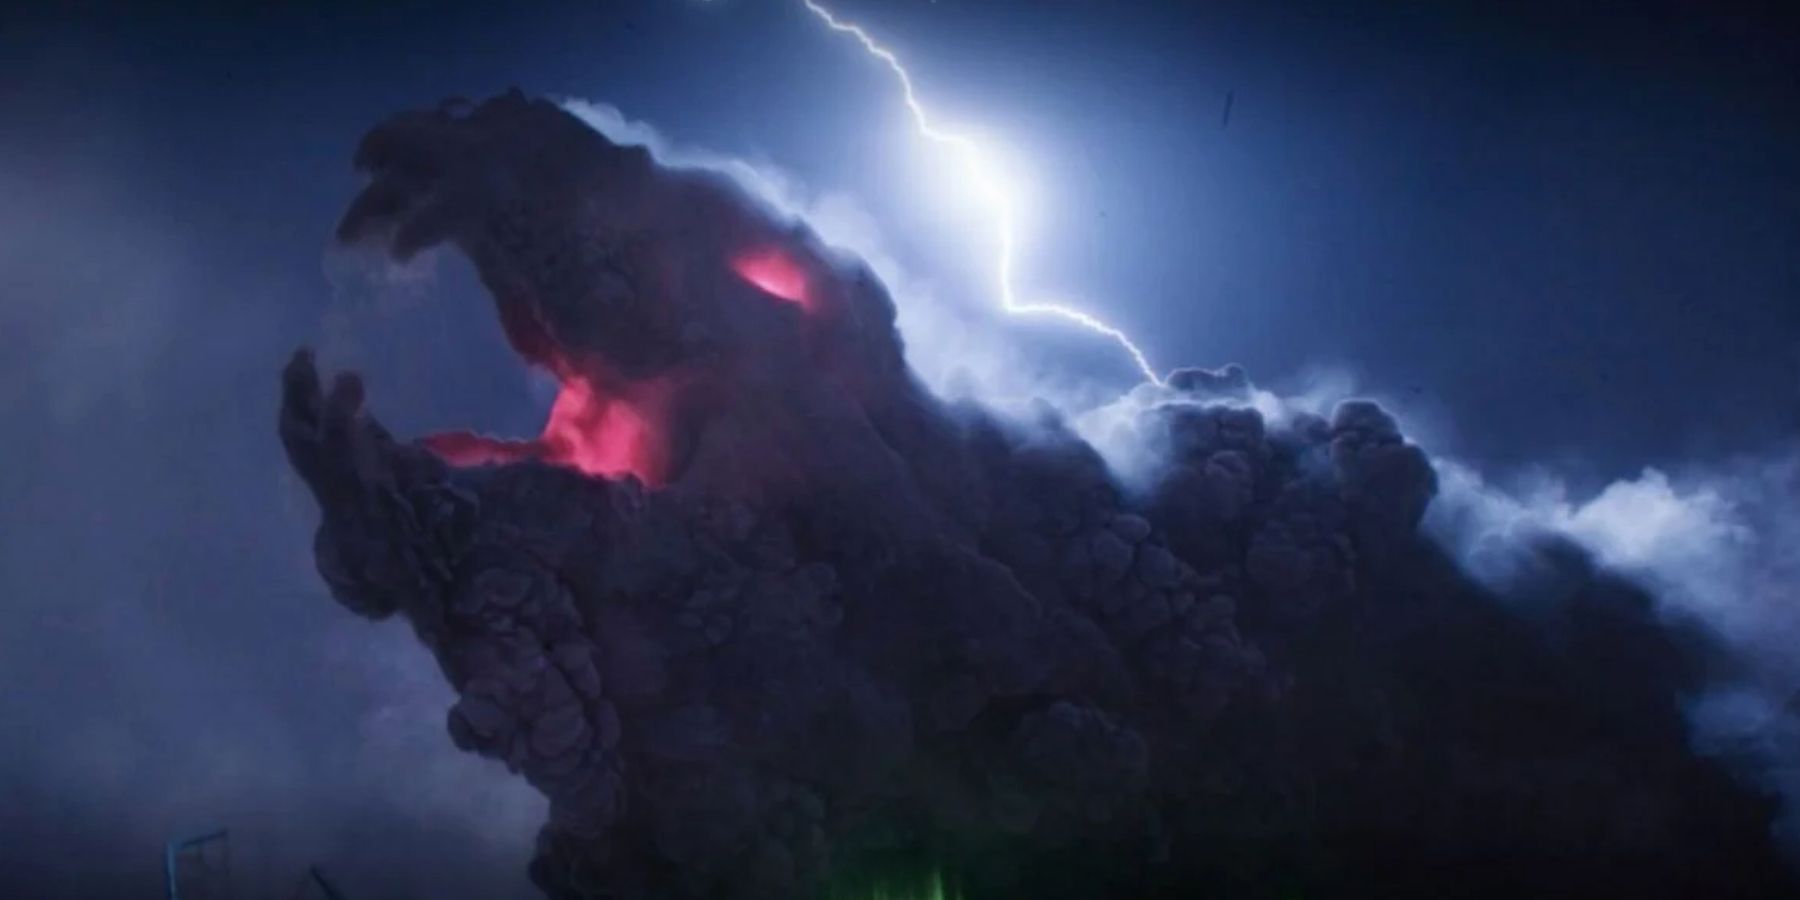 alioth appears as a sentient storm at the end of time in loki episode 5